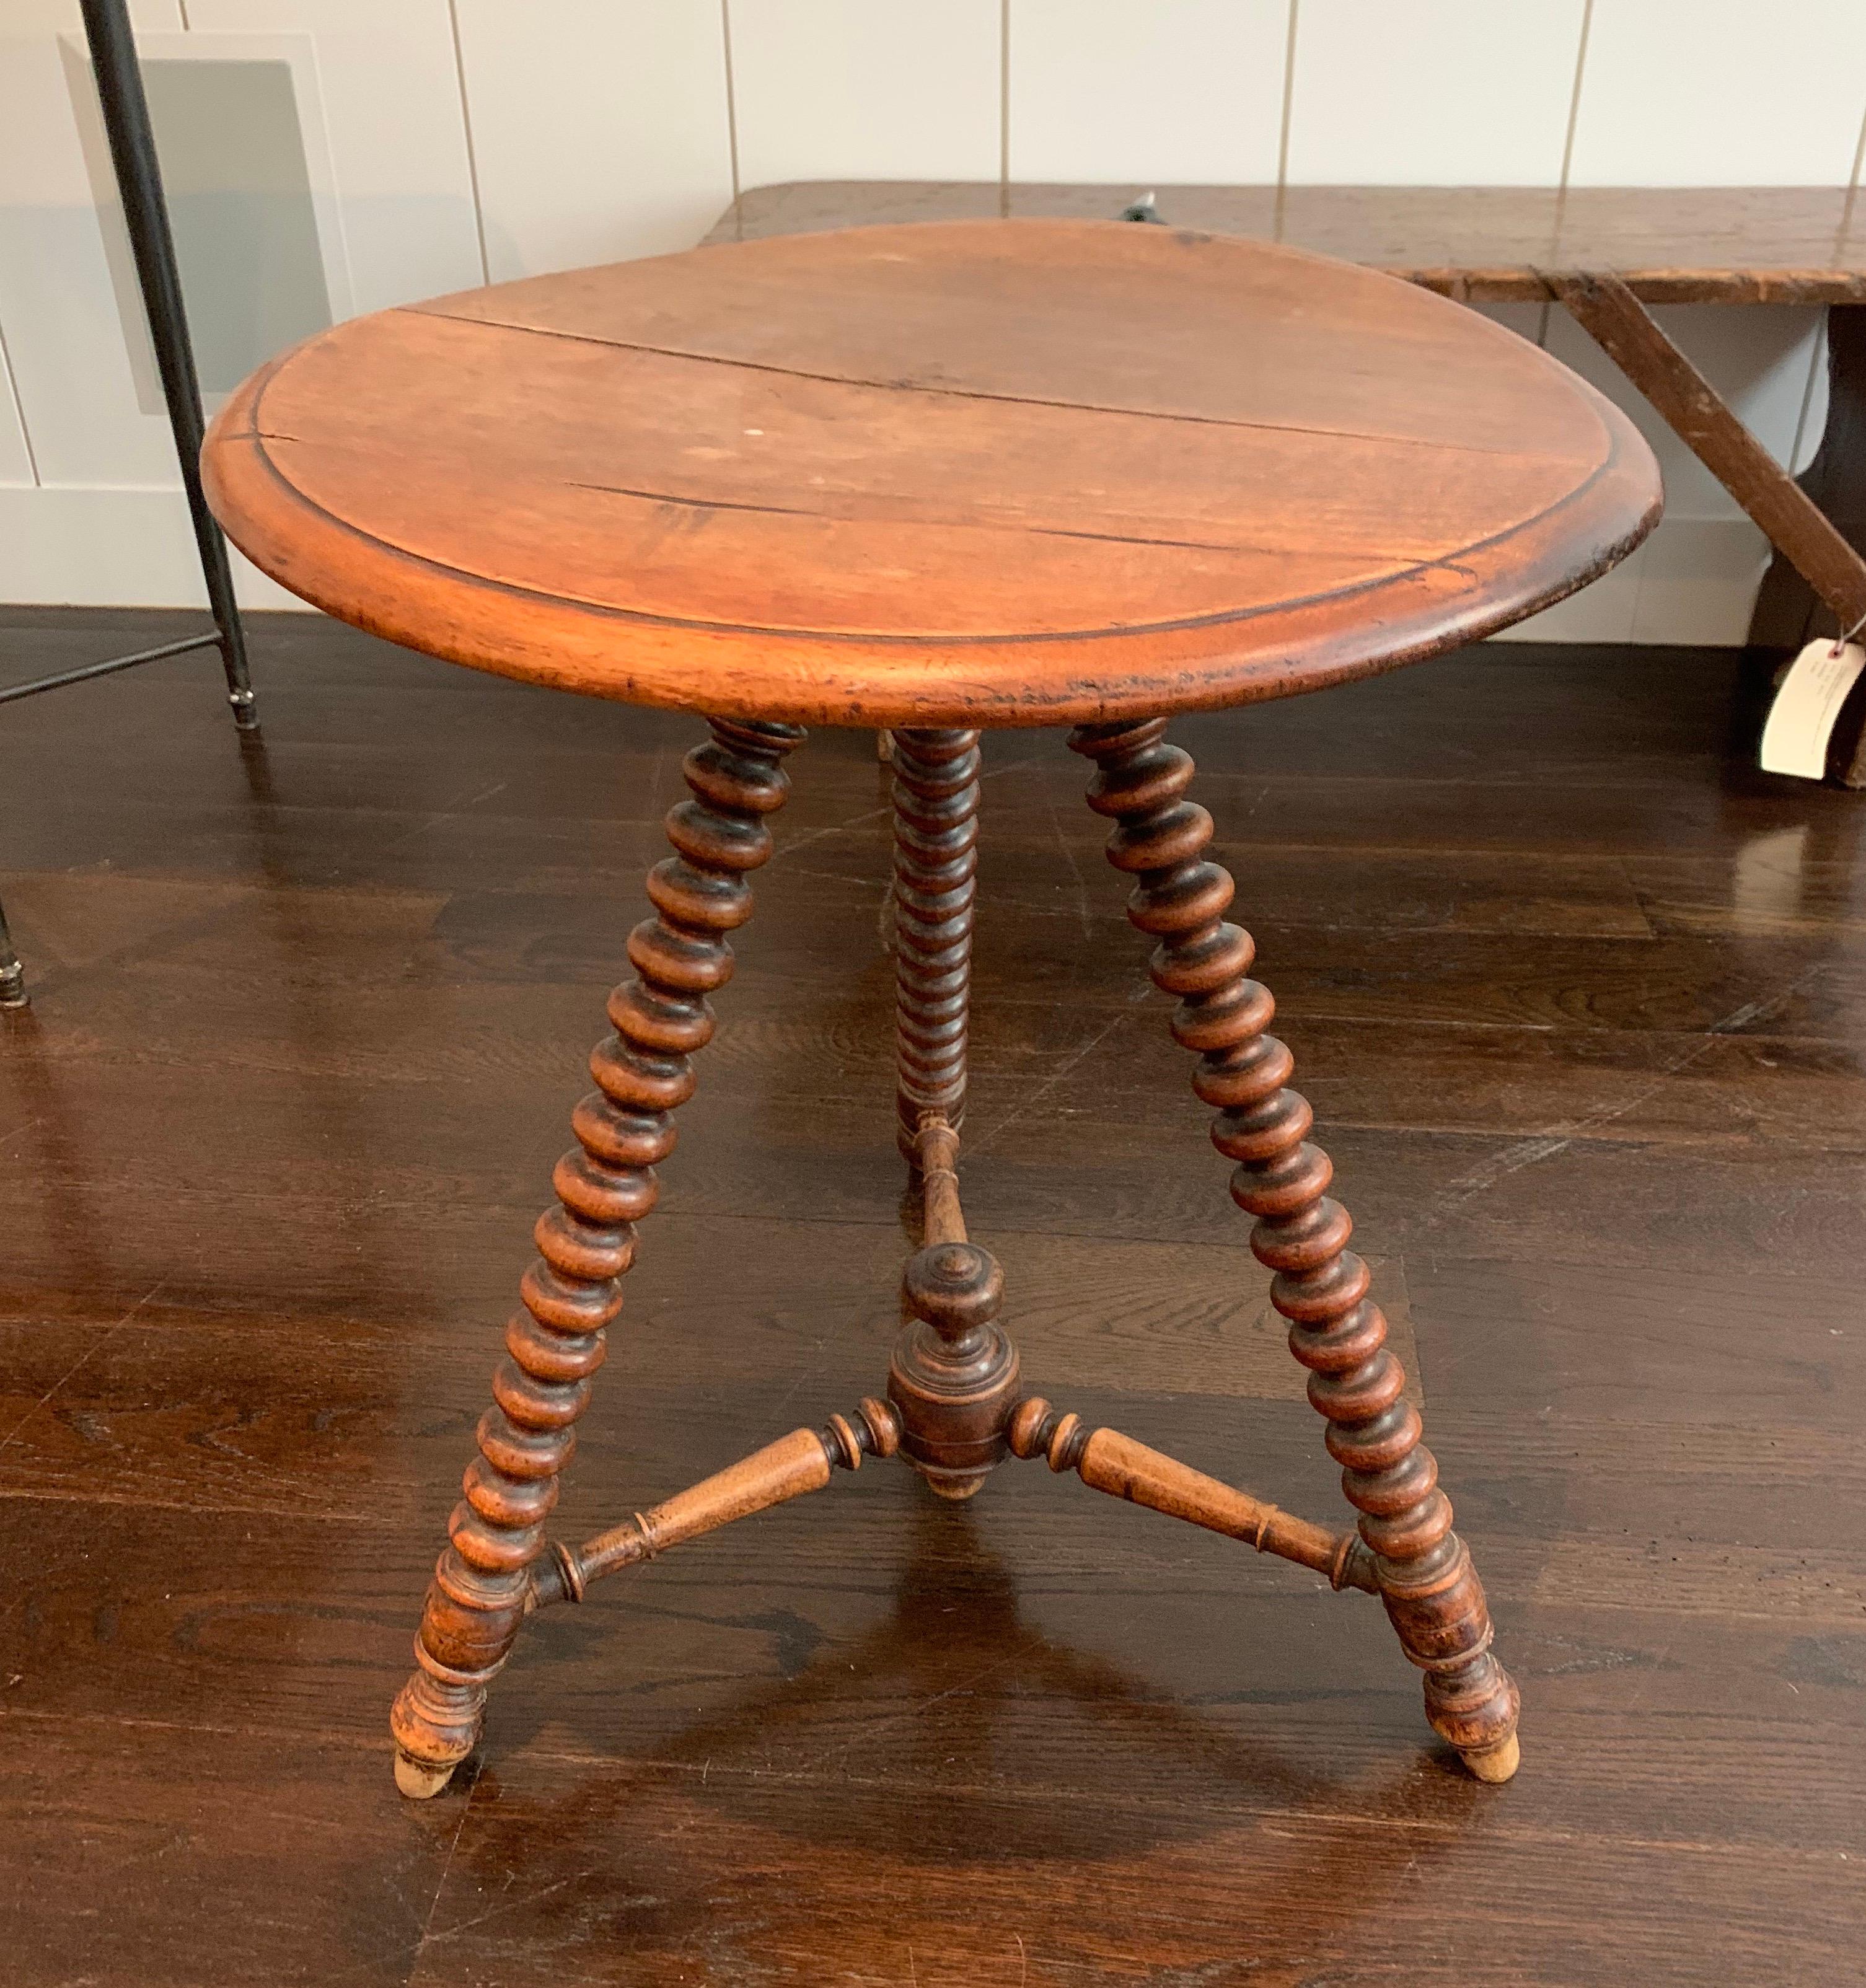 Wood Round Turned Leg Table With Knotted Legs